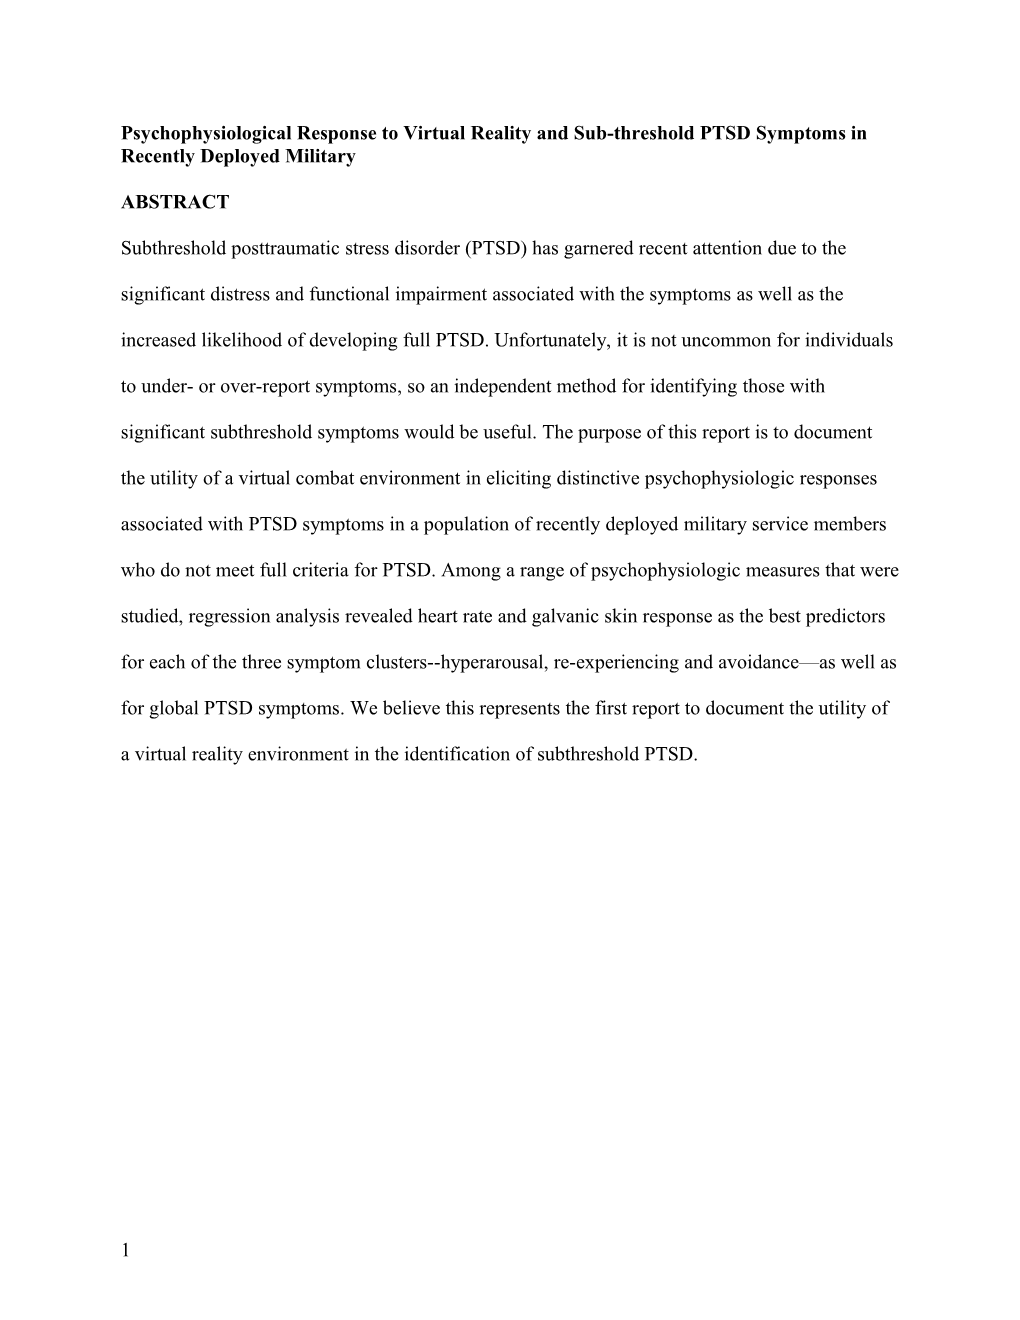 Psychophysiological Response to Virtual Reality and Sub-Threshold PTSD Symptoms in Recently